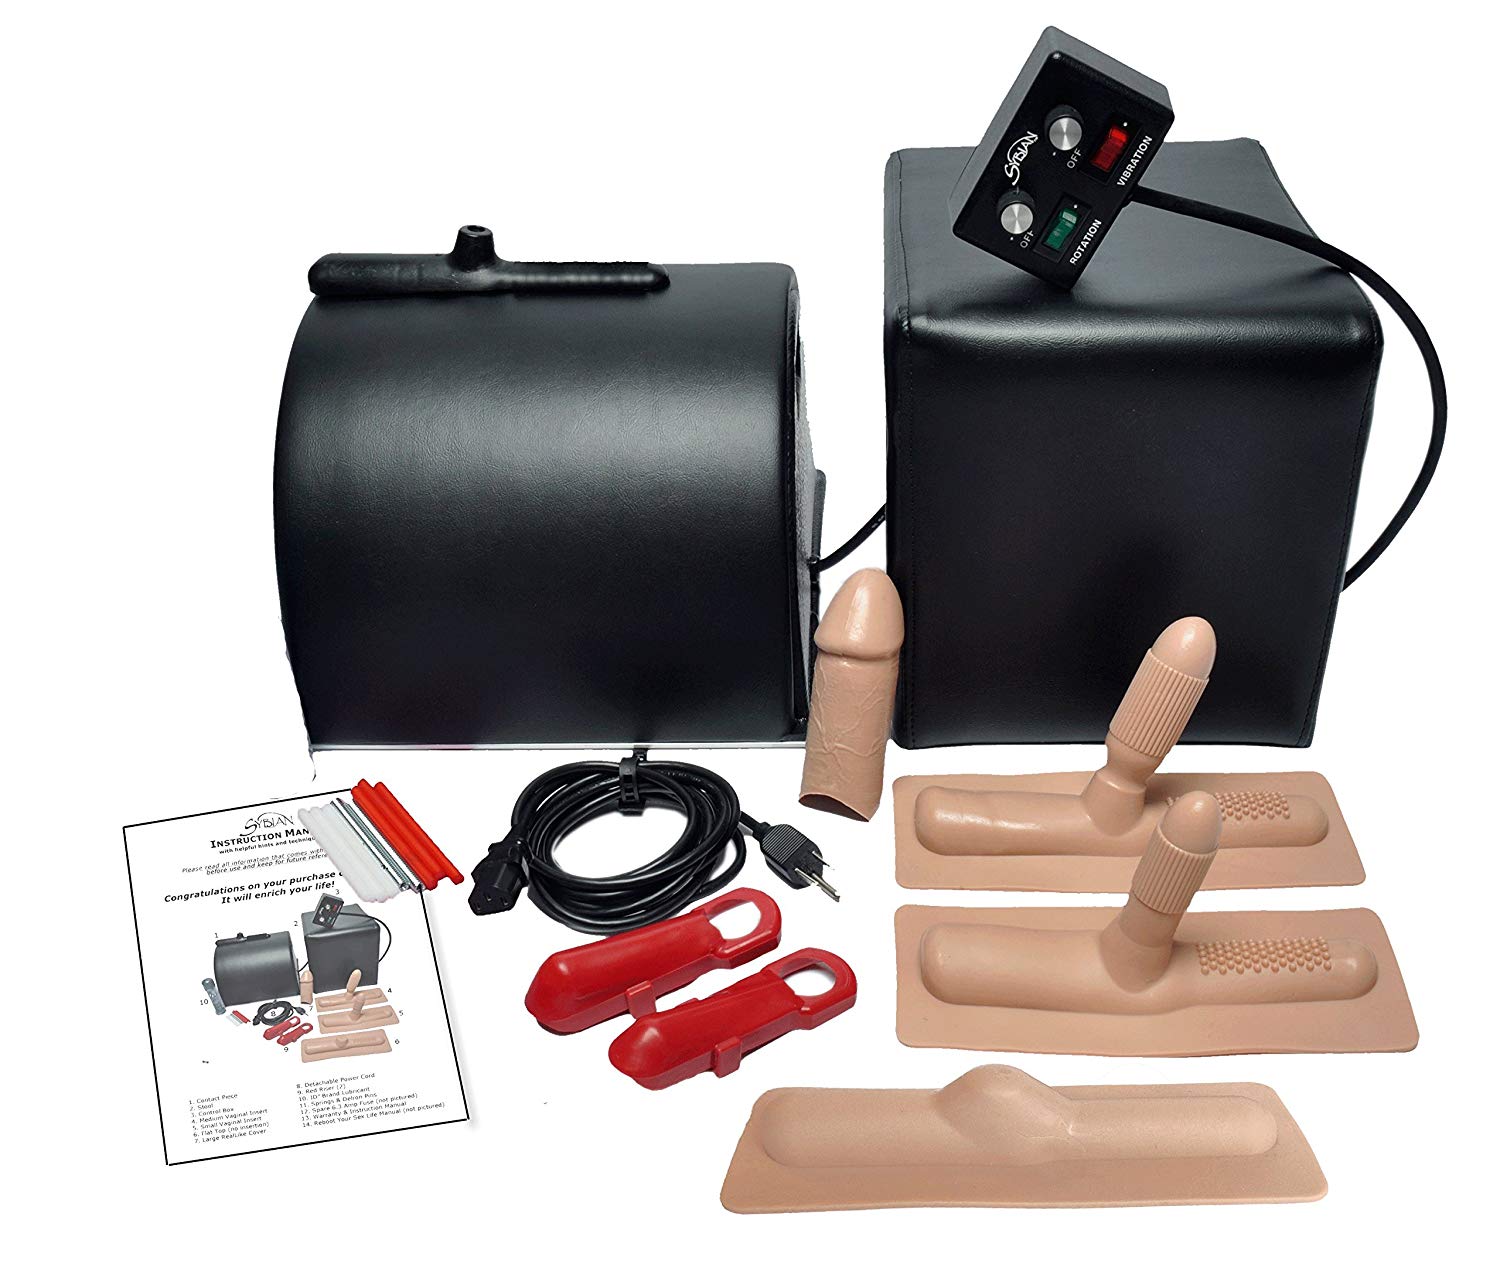 Machine Sex Toy - Review Sybian For Women: Orgasms Sex Machine - Comparison